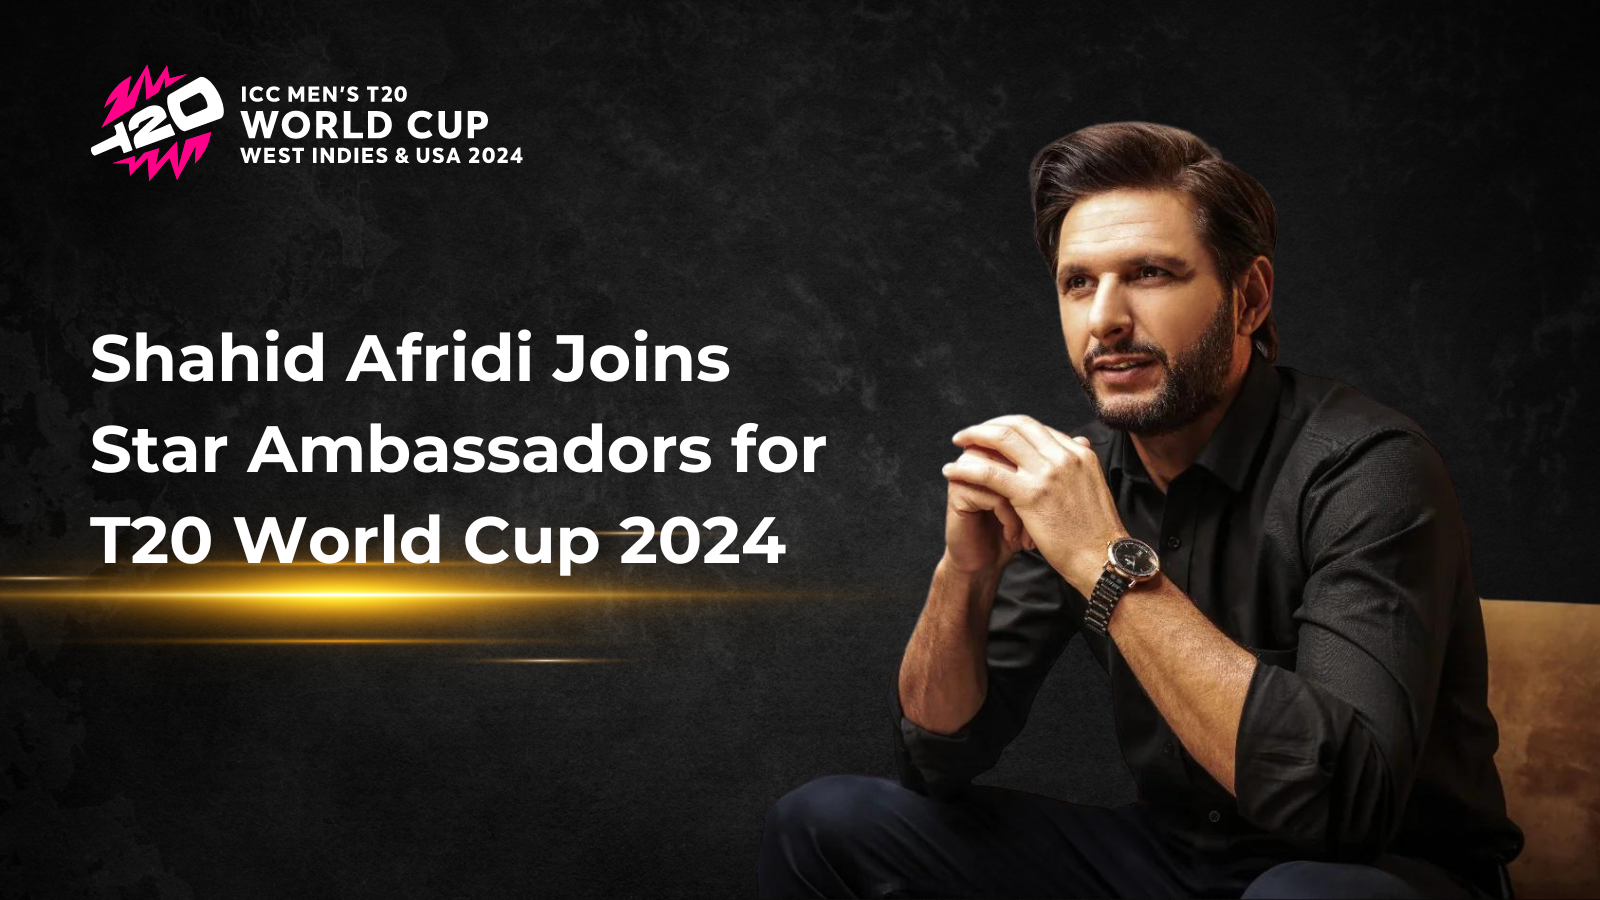 Shahid Afridi Joins Star Ambassadors for T20 World Cup 2024